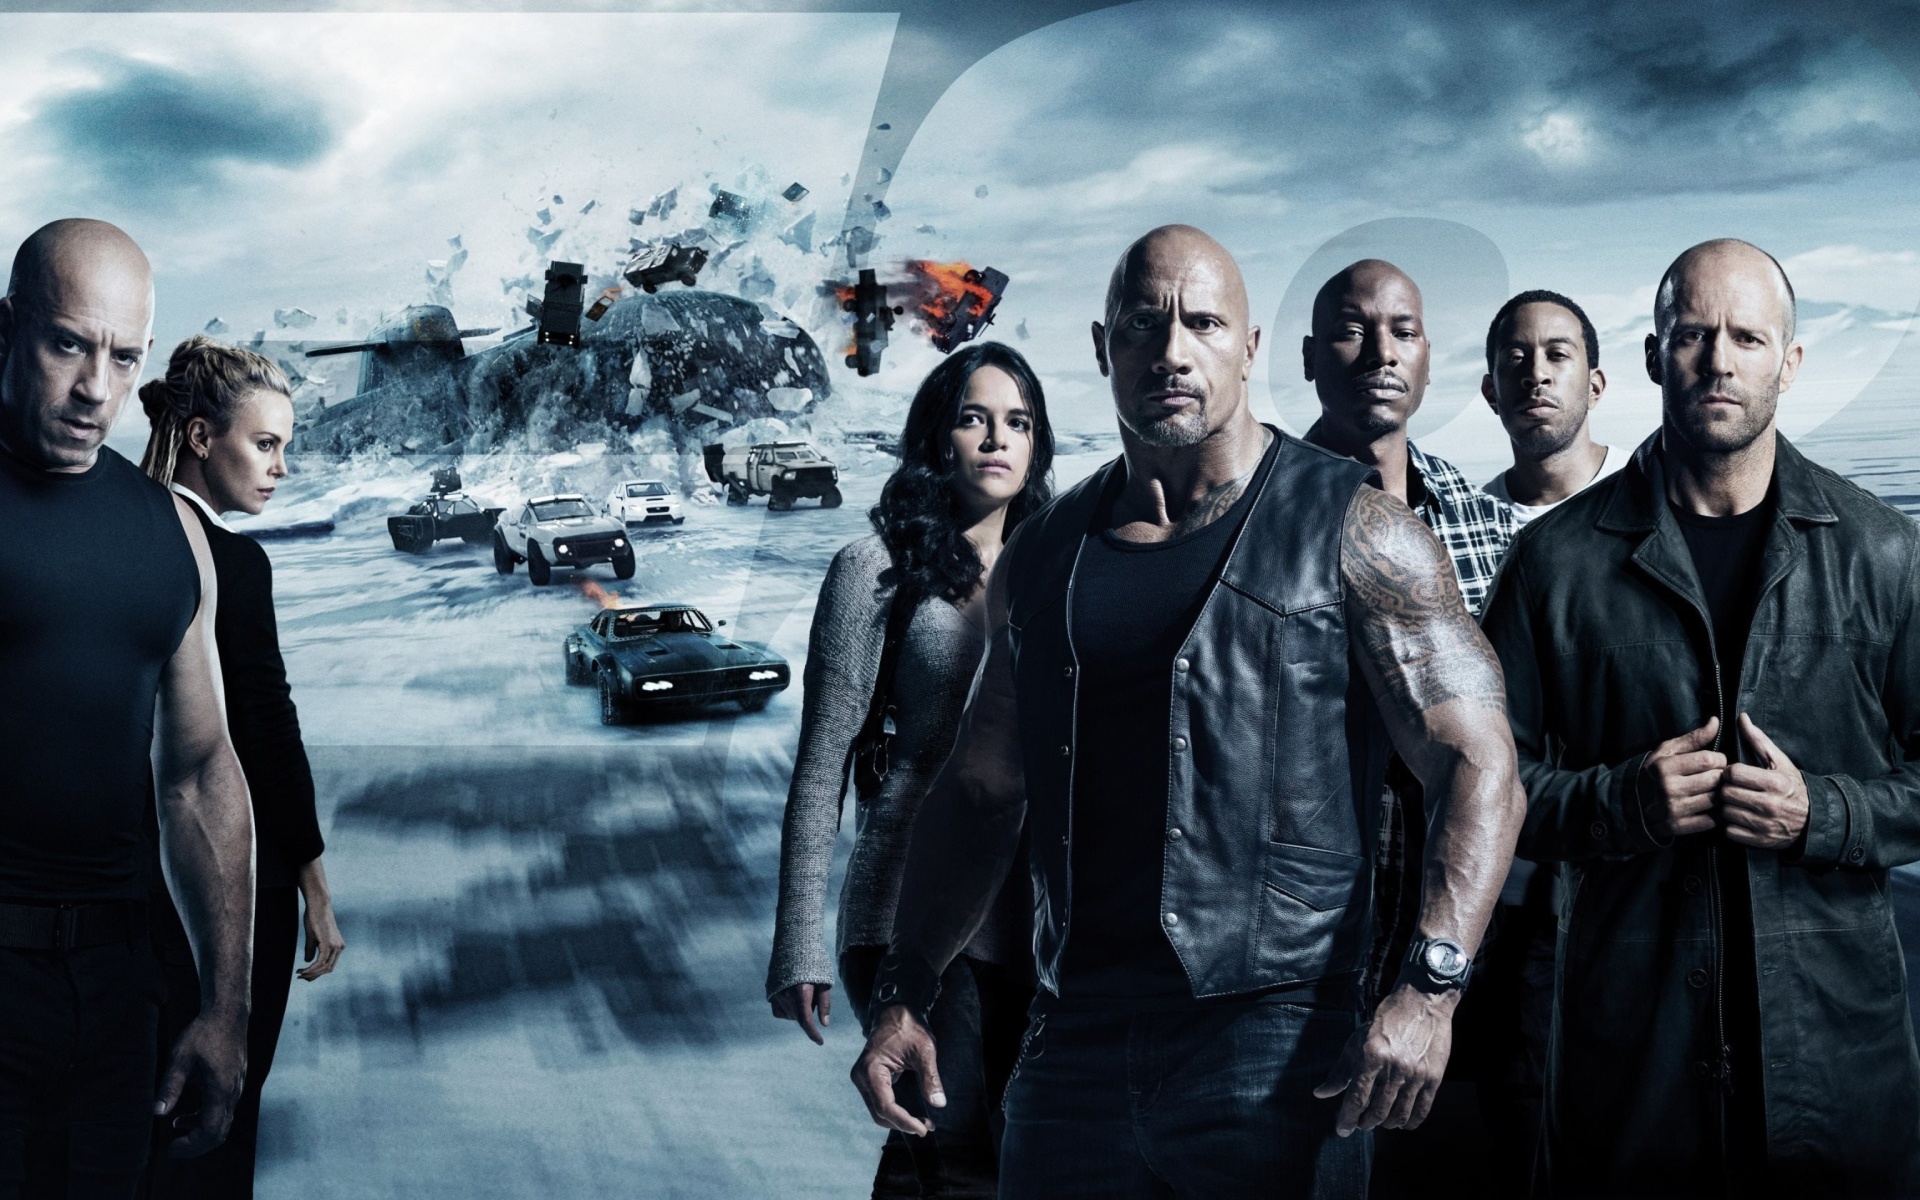 Das The Fate of the Furious with Vin Diesel, Dwayne Johnson, Charlize Theron Wallpaper 1920x1200